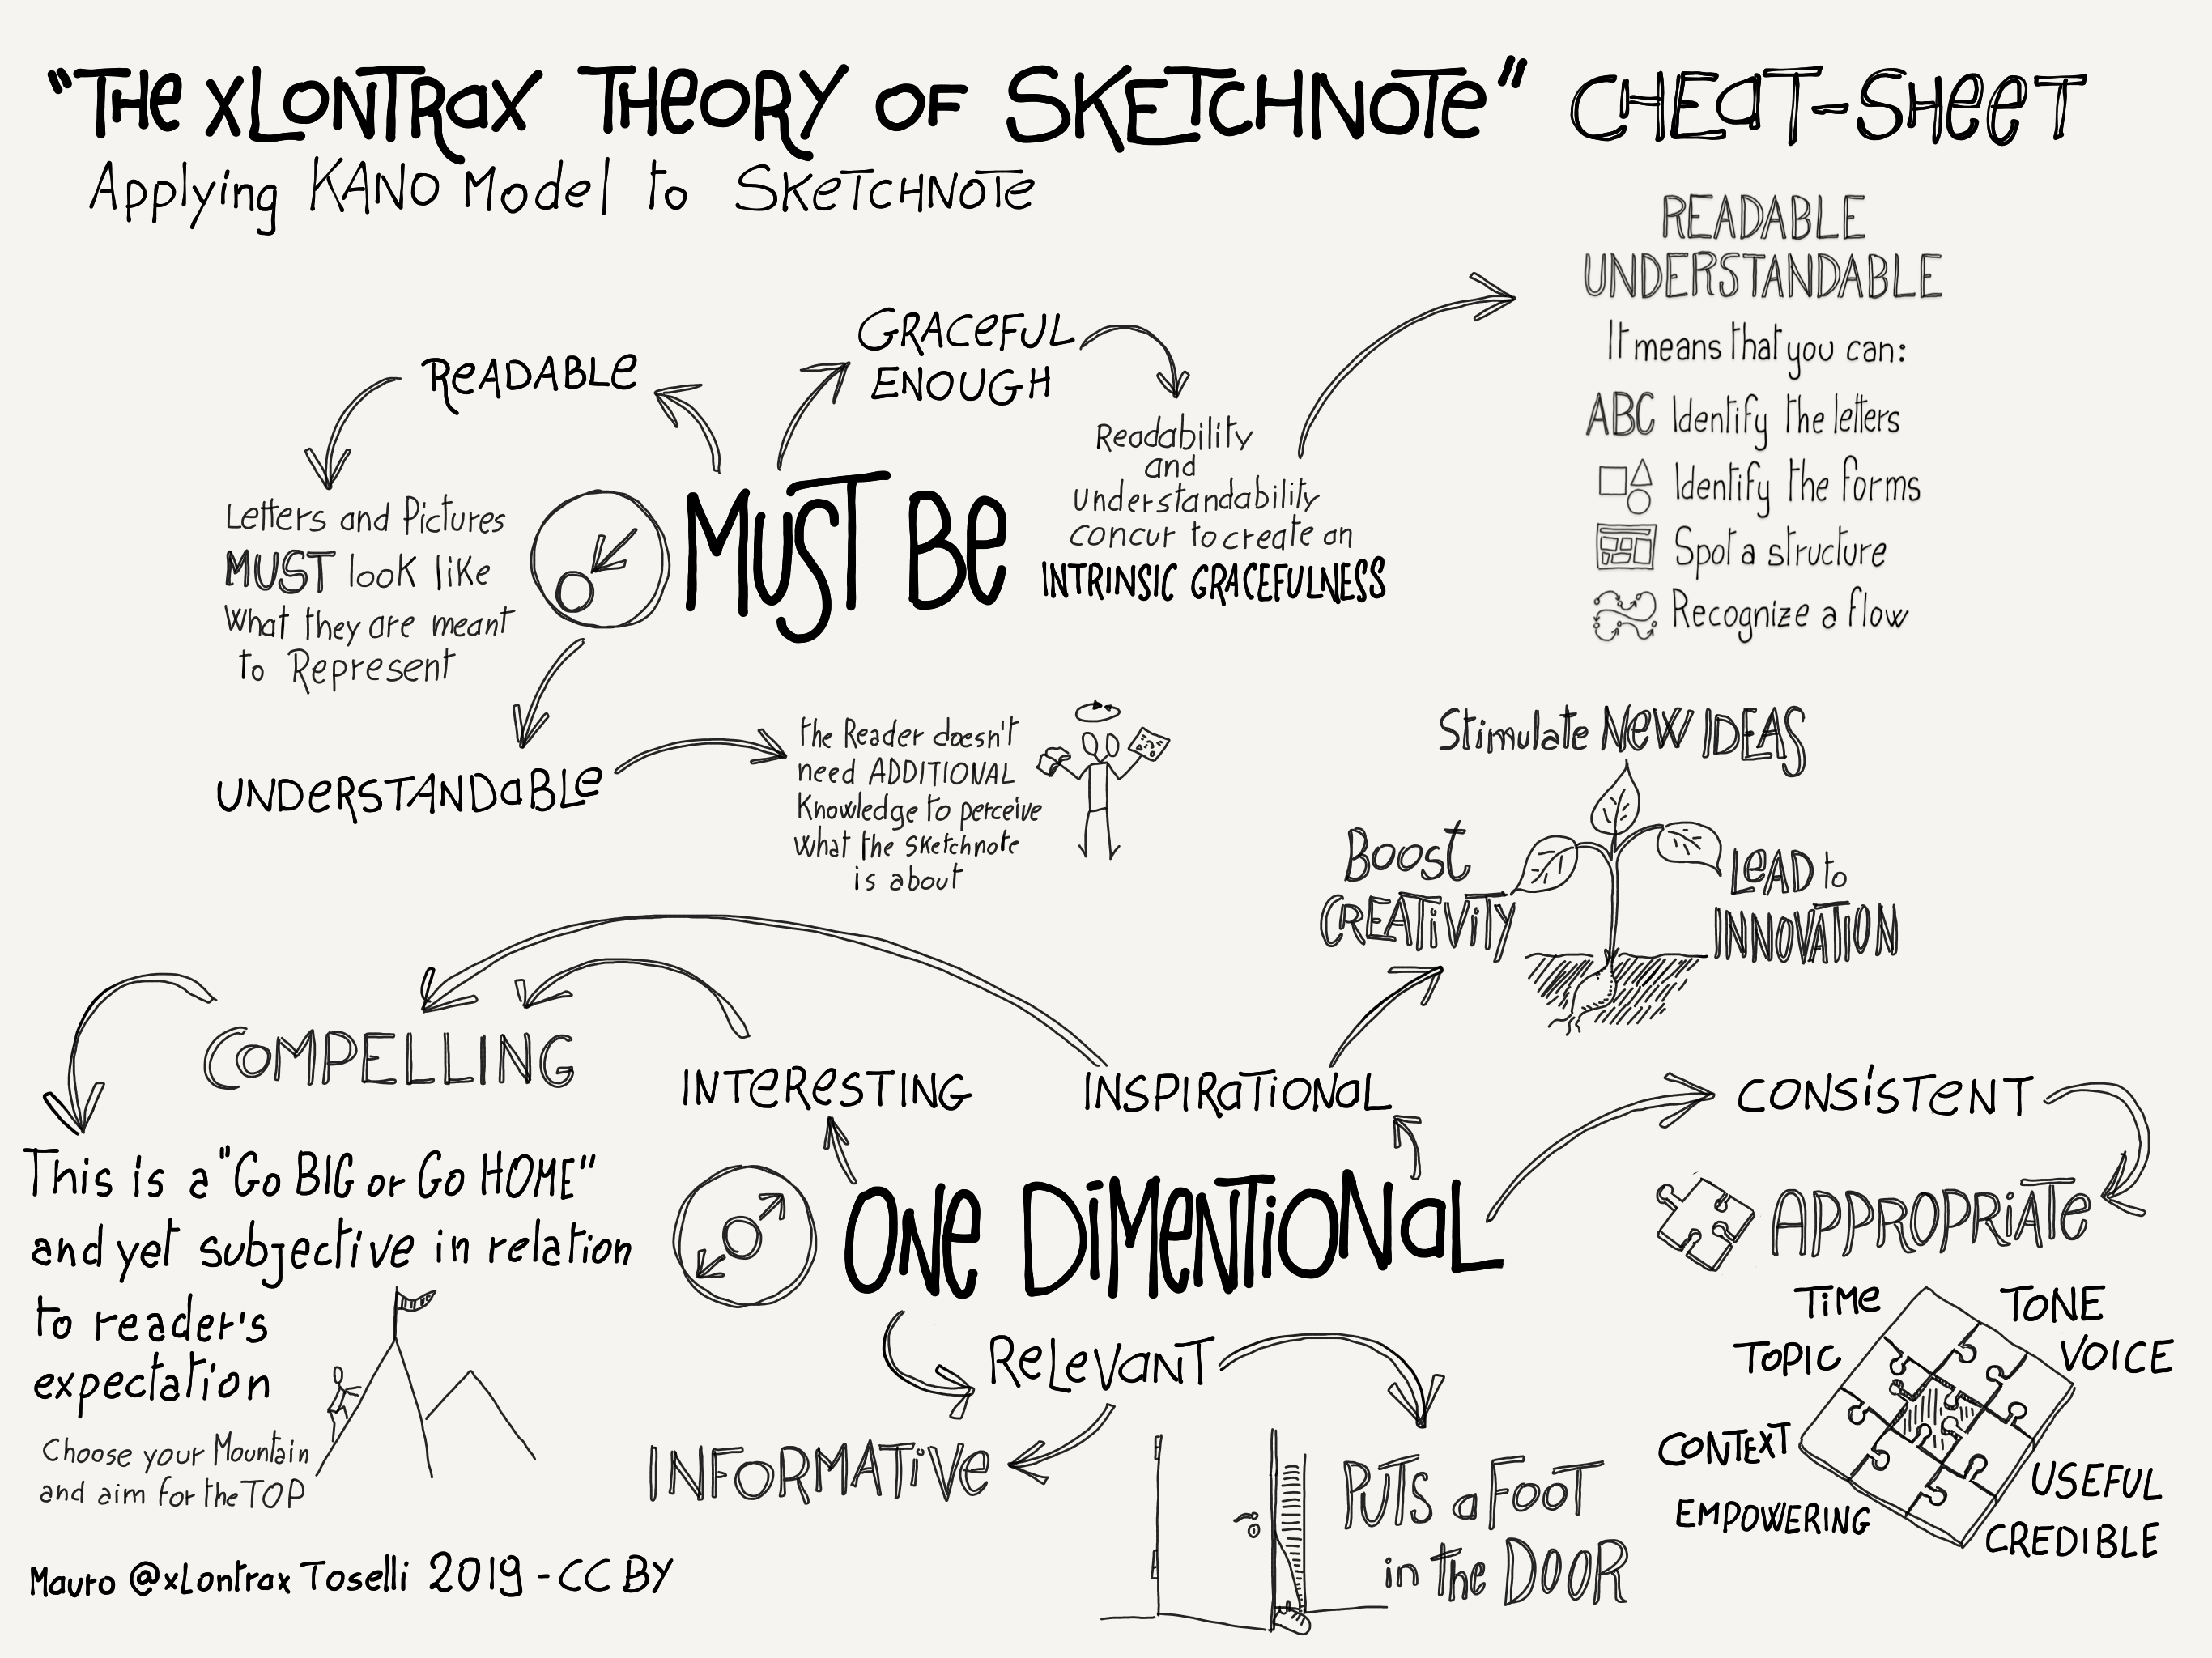 The xLontrax theory of sketchnote by Mauro @xLontrax Toselli CC-BY